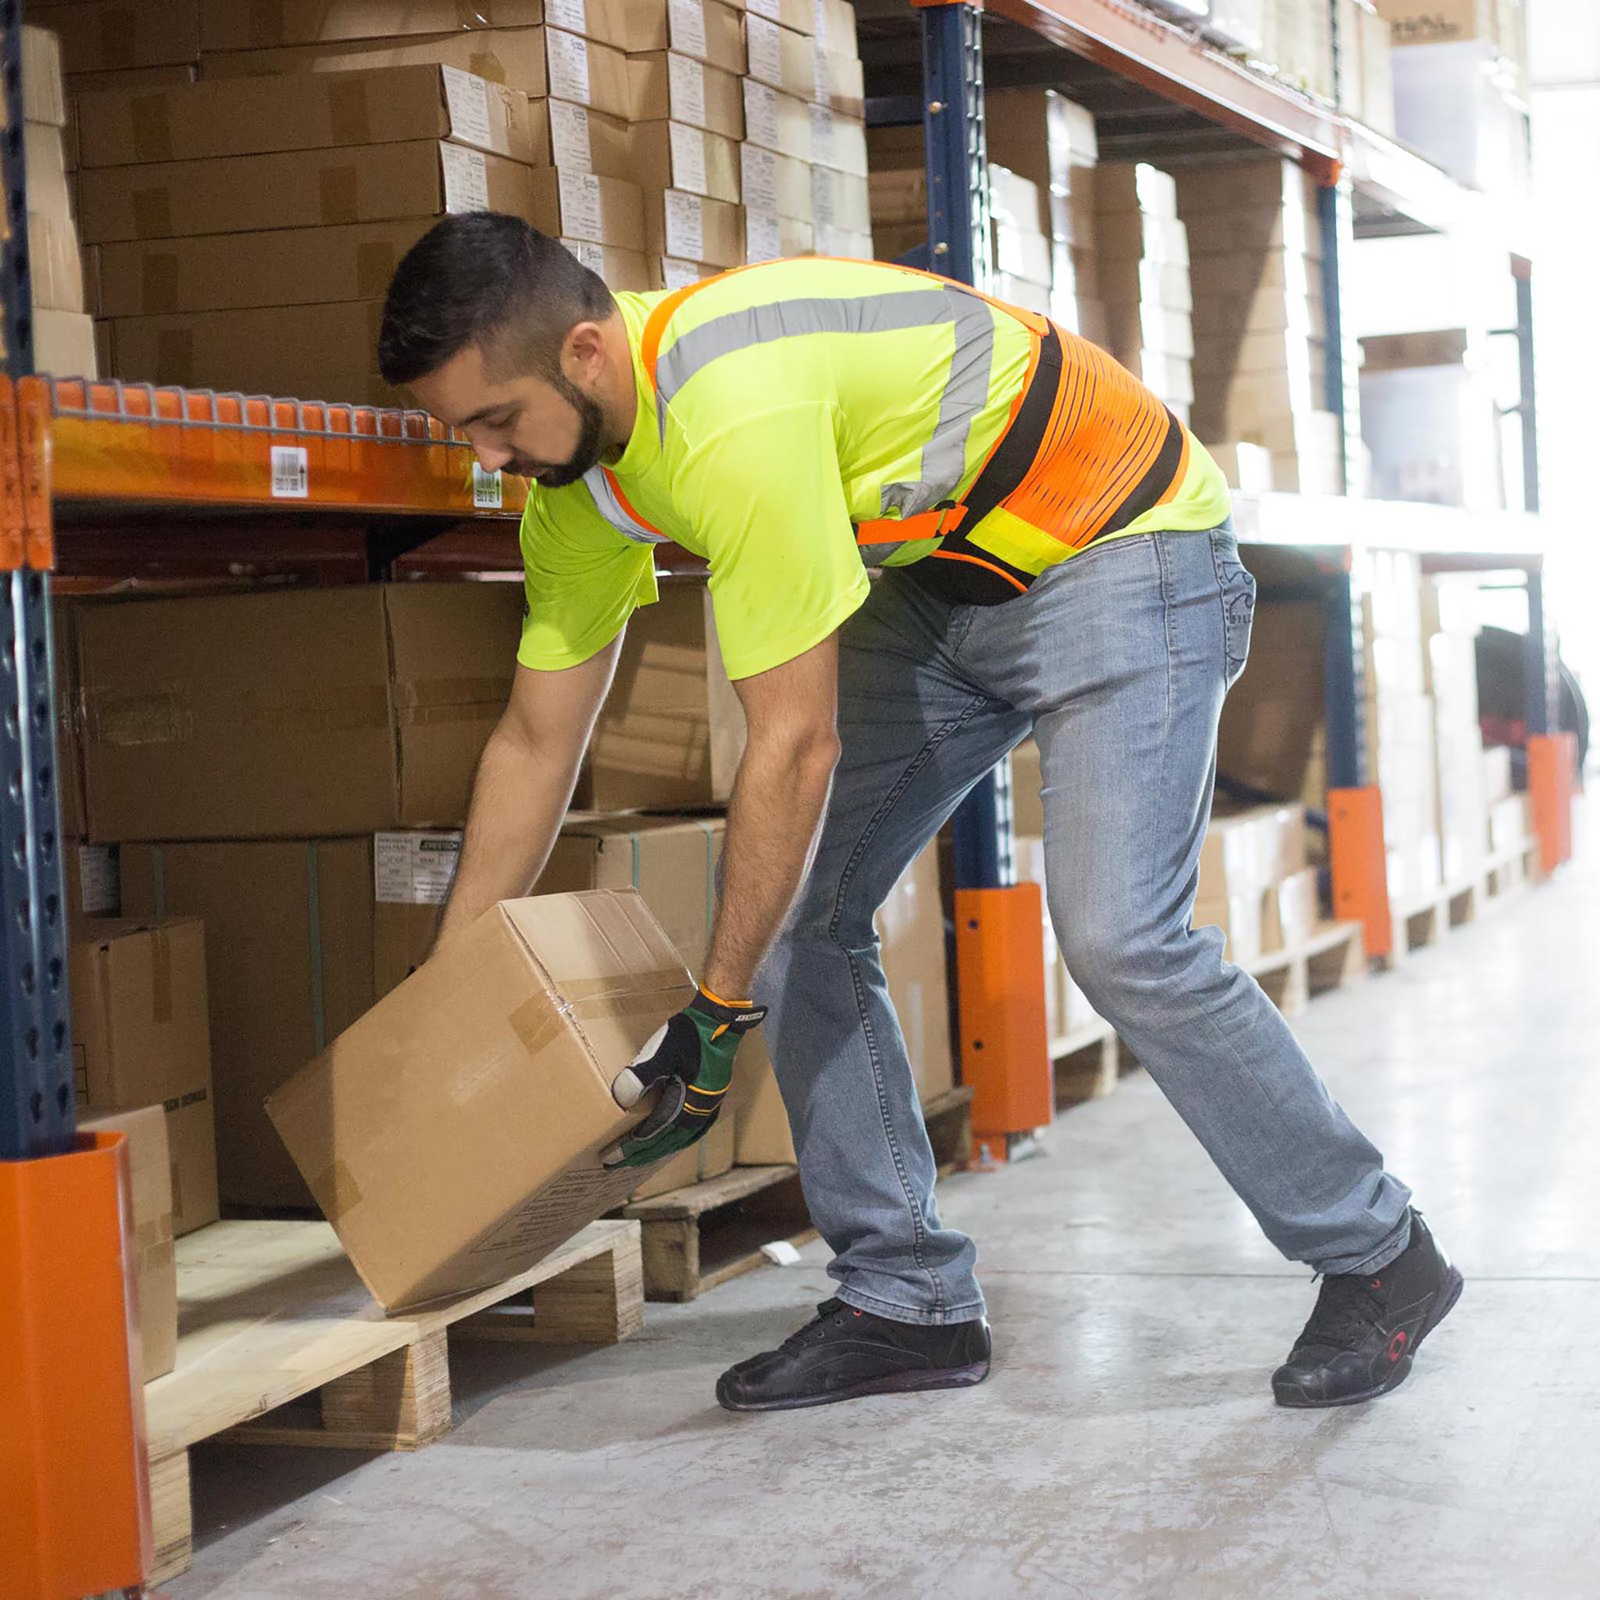 A worker wearing a high visibility adjustable heavy duty back support belt while organizing boxes inside storage racks in a warehouse